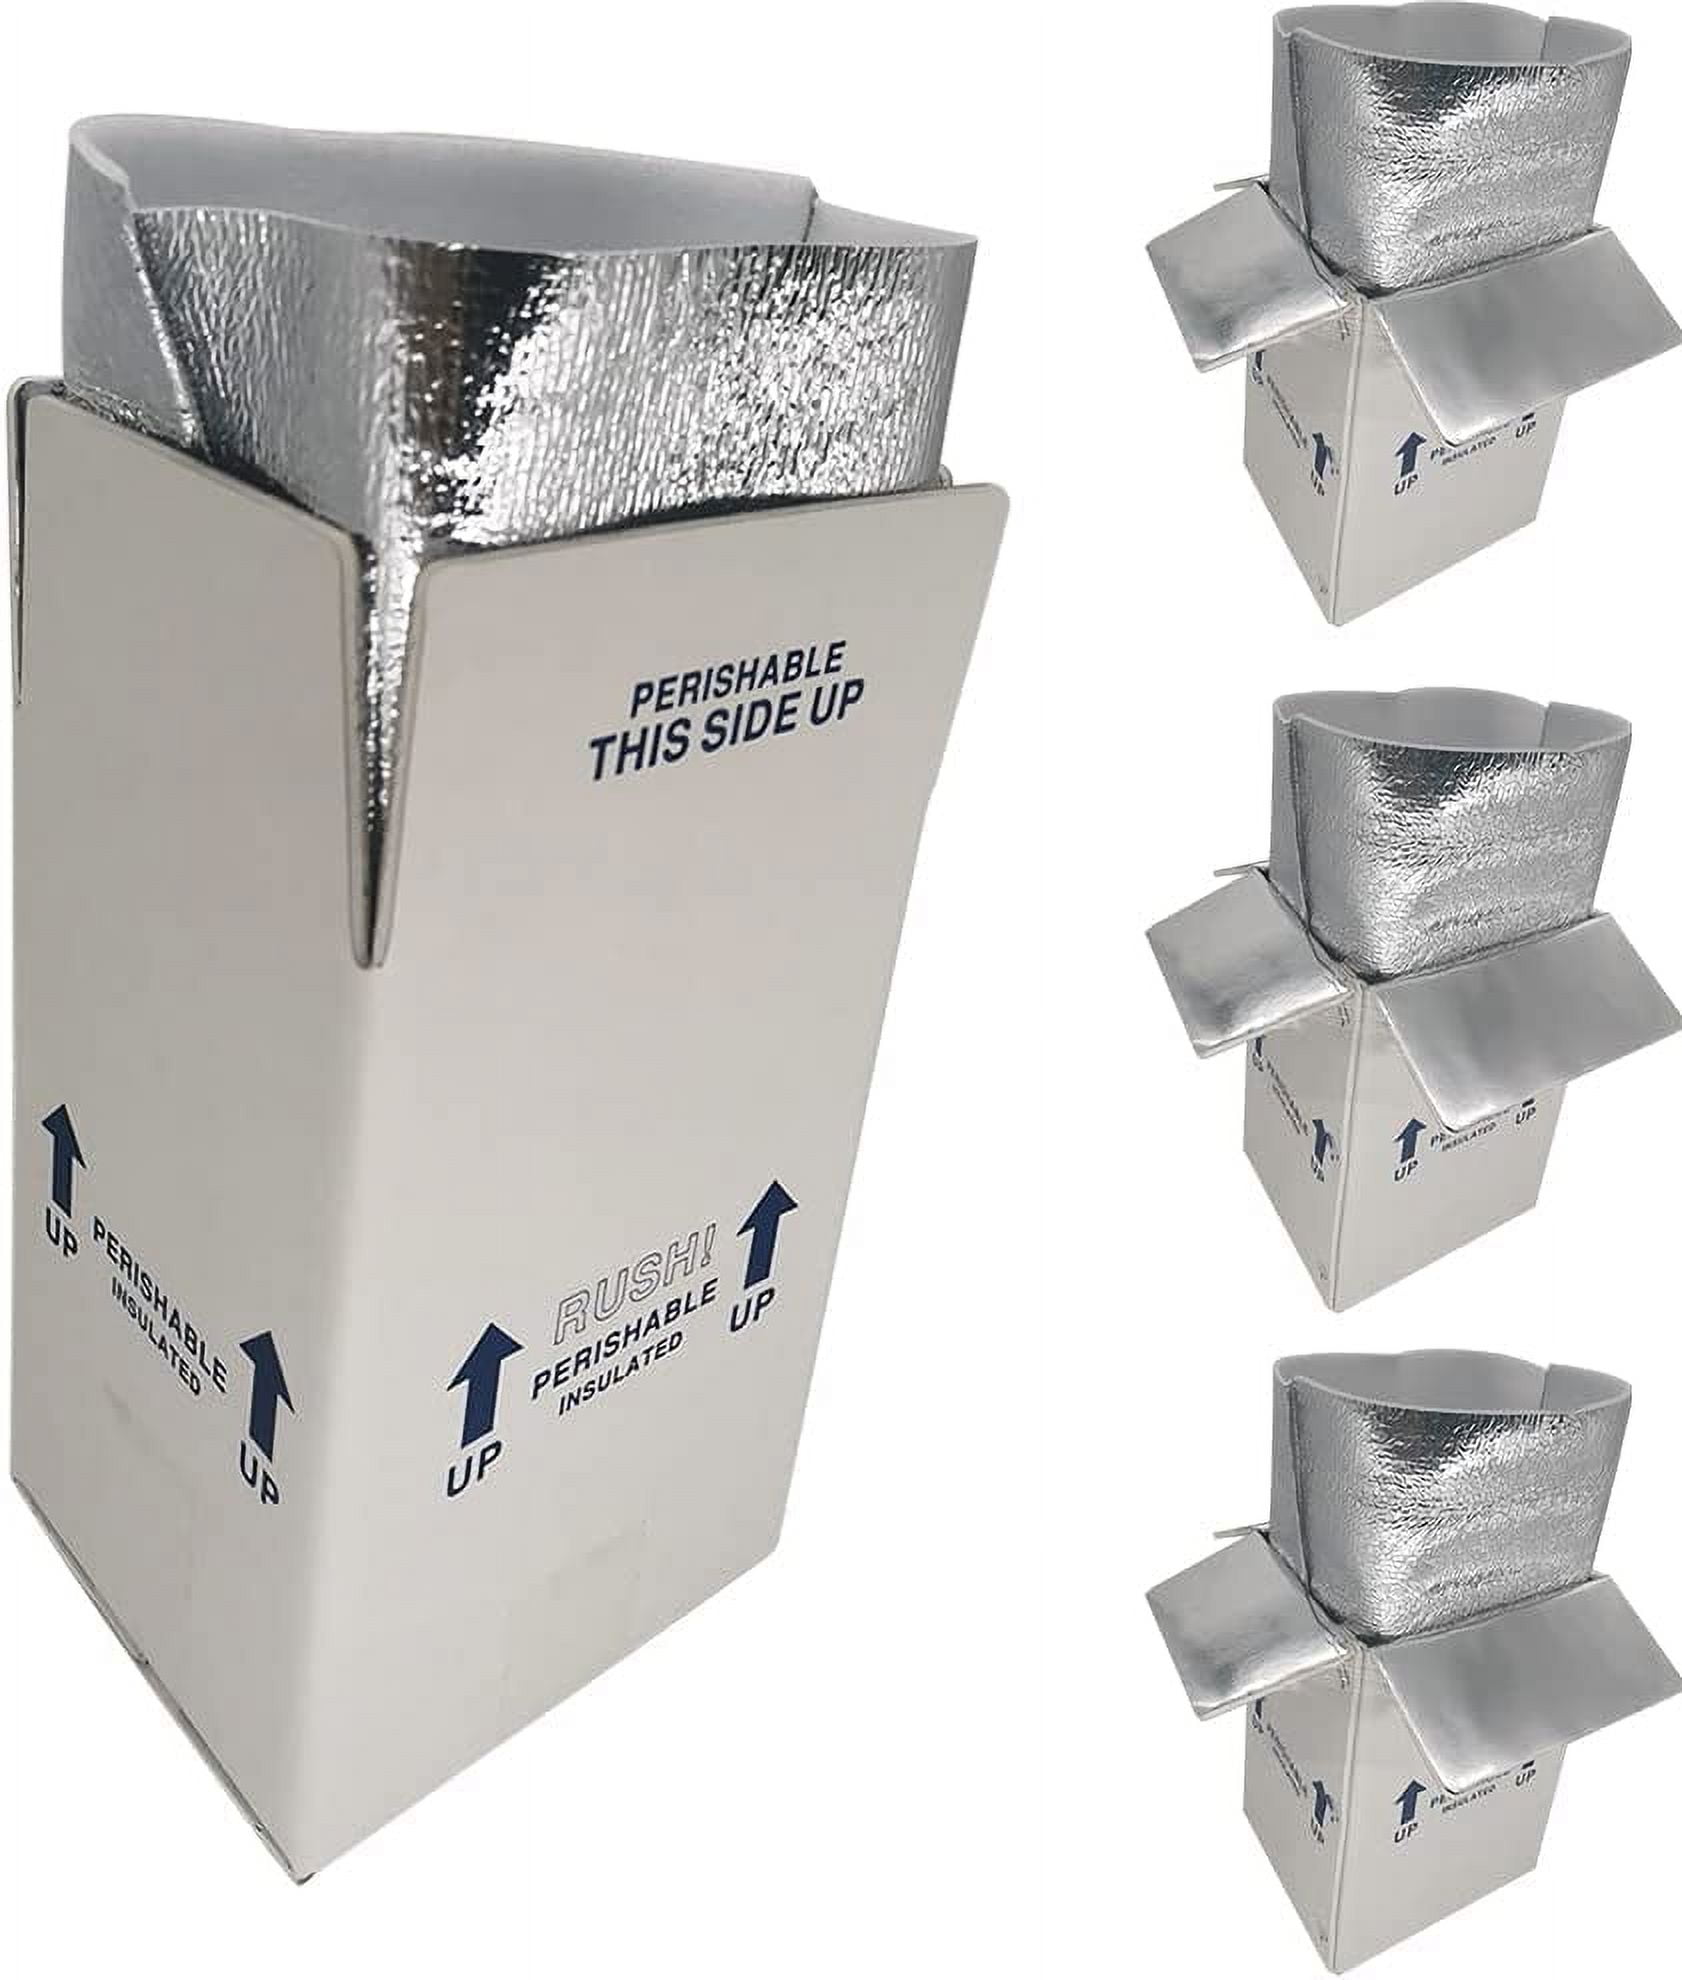 CH-BOX Thermo Chill Insulated Carton Shipping Box Mailer with Aluminum Foil  Foam Bag Liner, 4 Pack 7'' x 6'' x 10'' Small Perishable Shipper to Ship